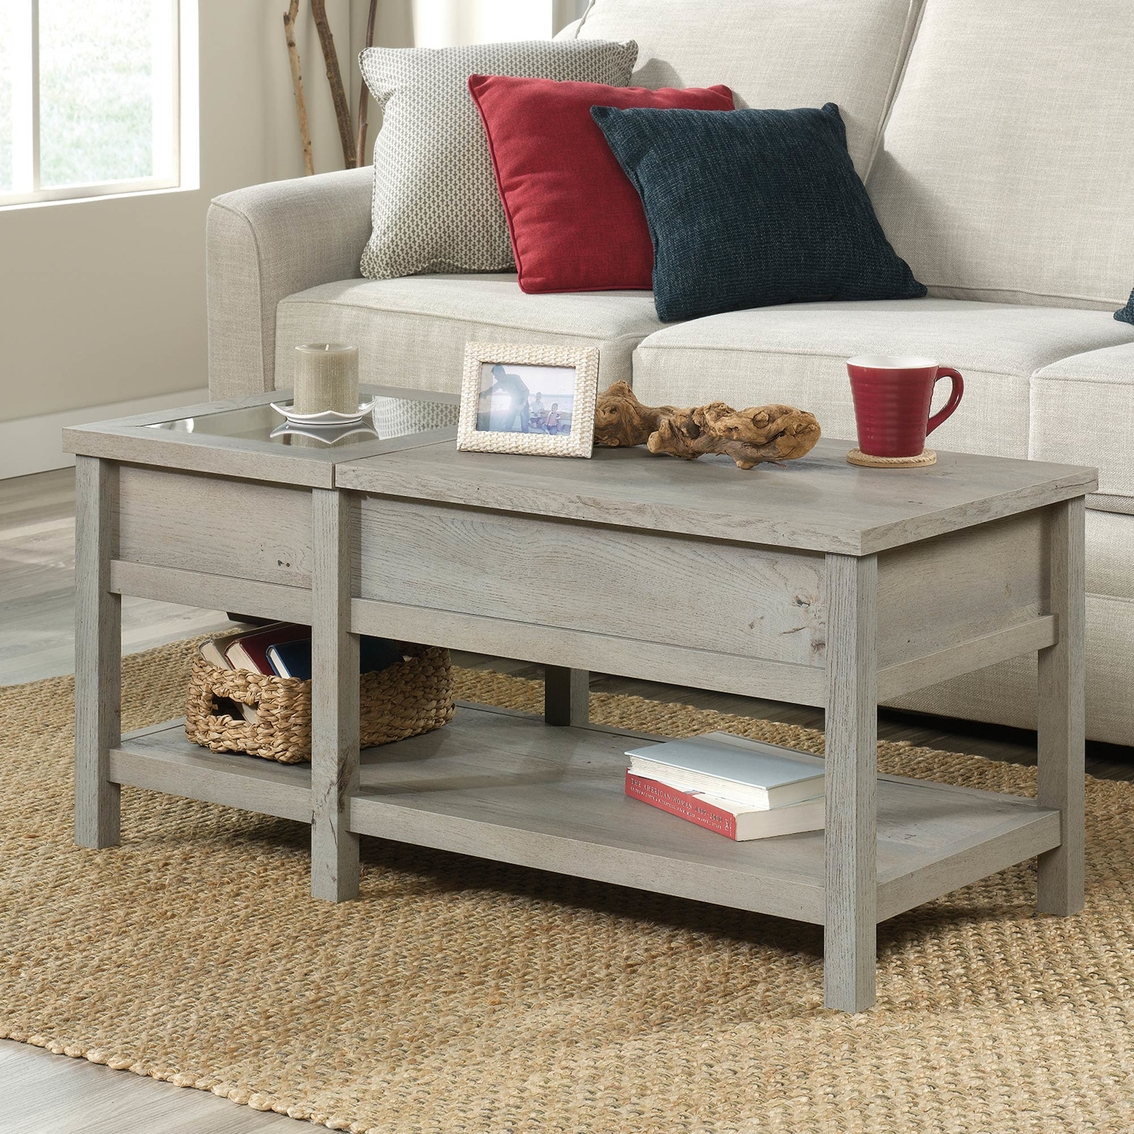 Cottage Road Lift Top Coffee Table - Image 2 of 4